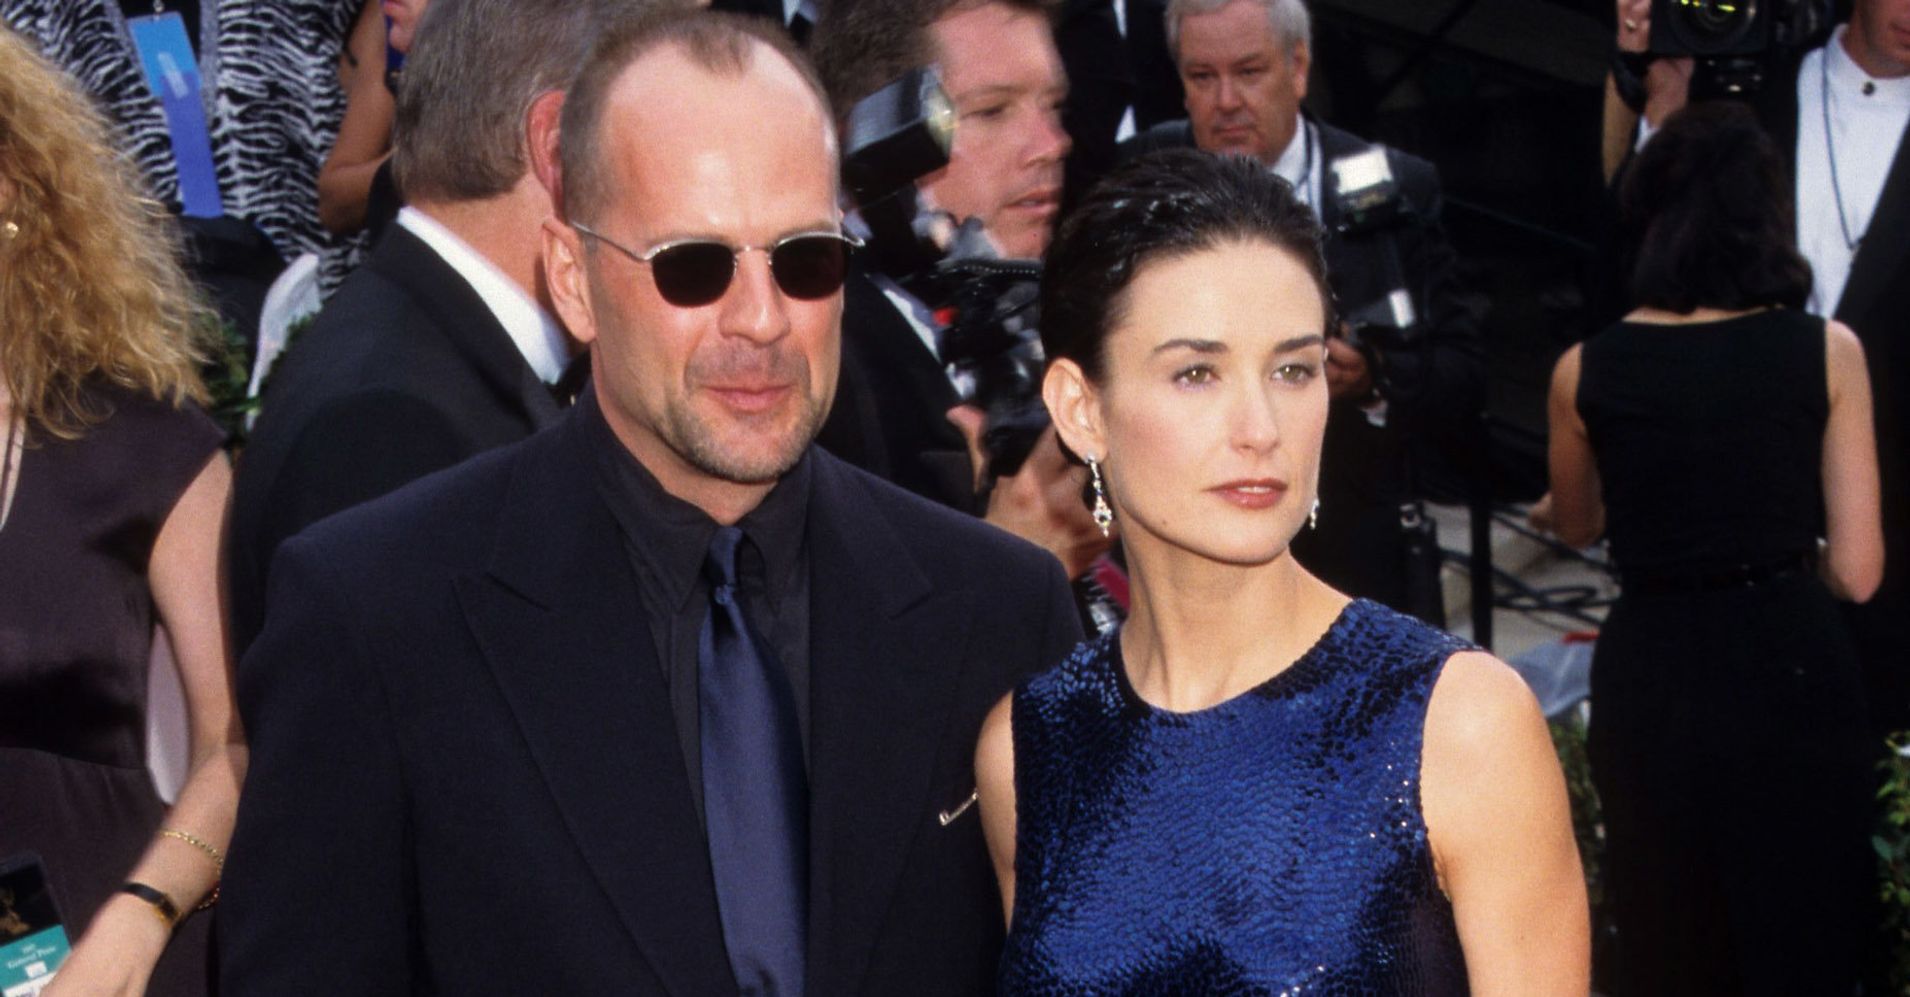 This Is What The Emmy Awards Looked Liked In 1997 | HuffPost